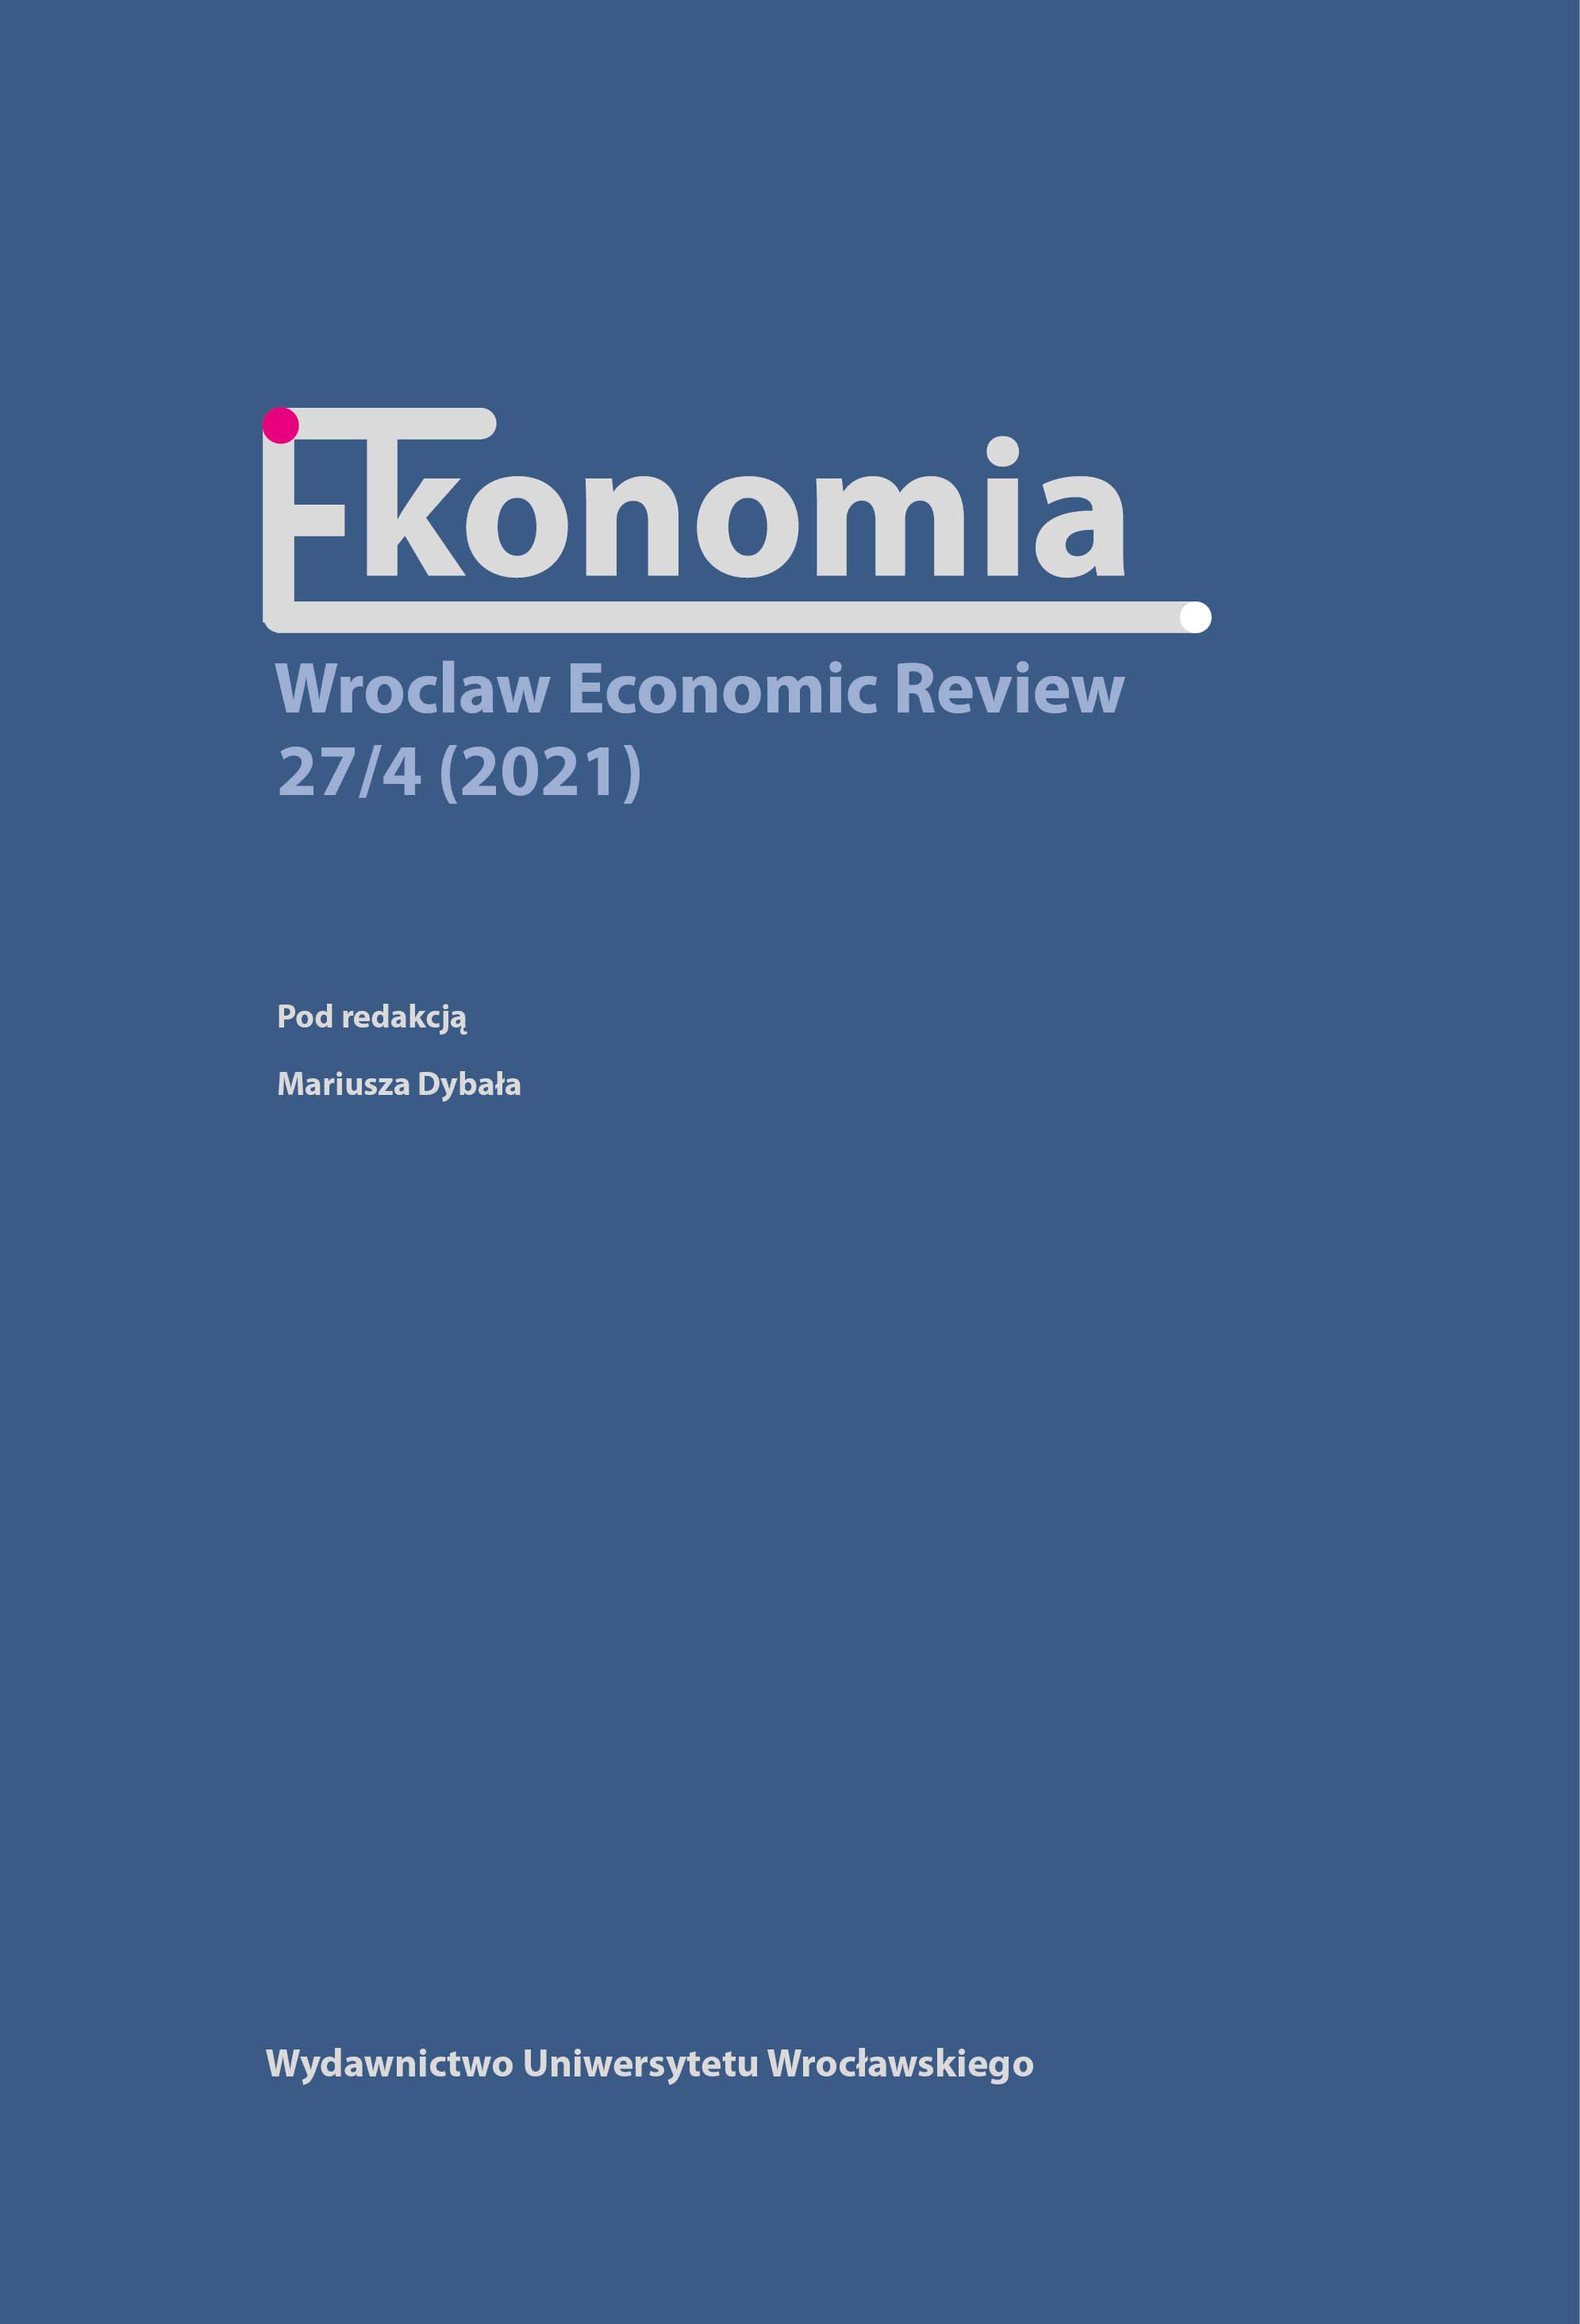 Patent law and innovations of the Polish economy: Analysis of the current situation and recommendations for the future